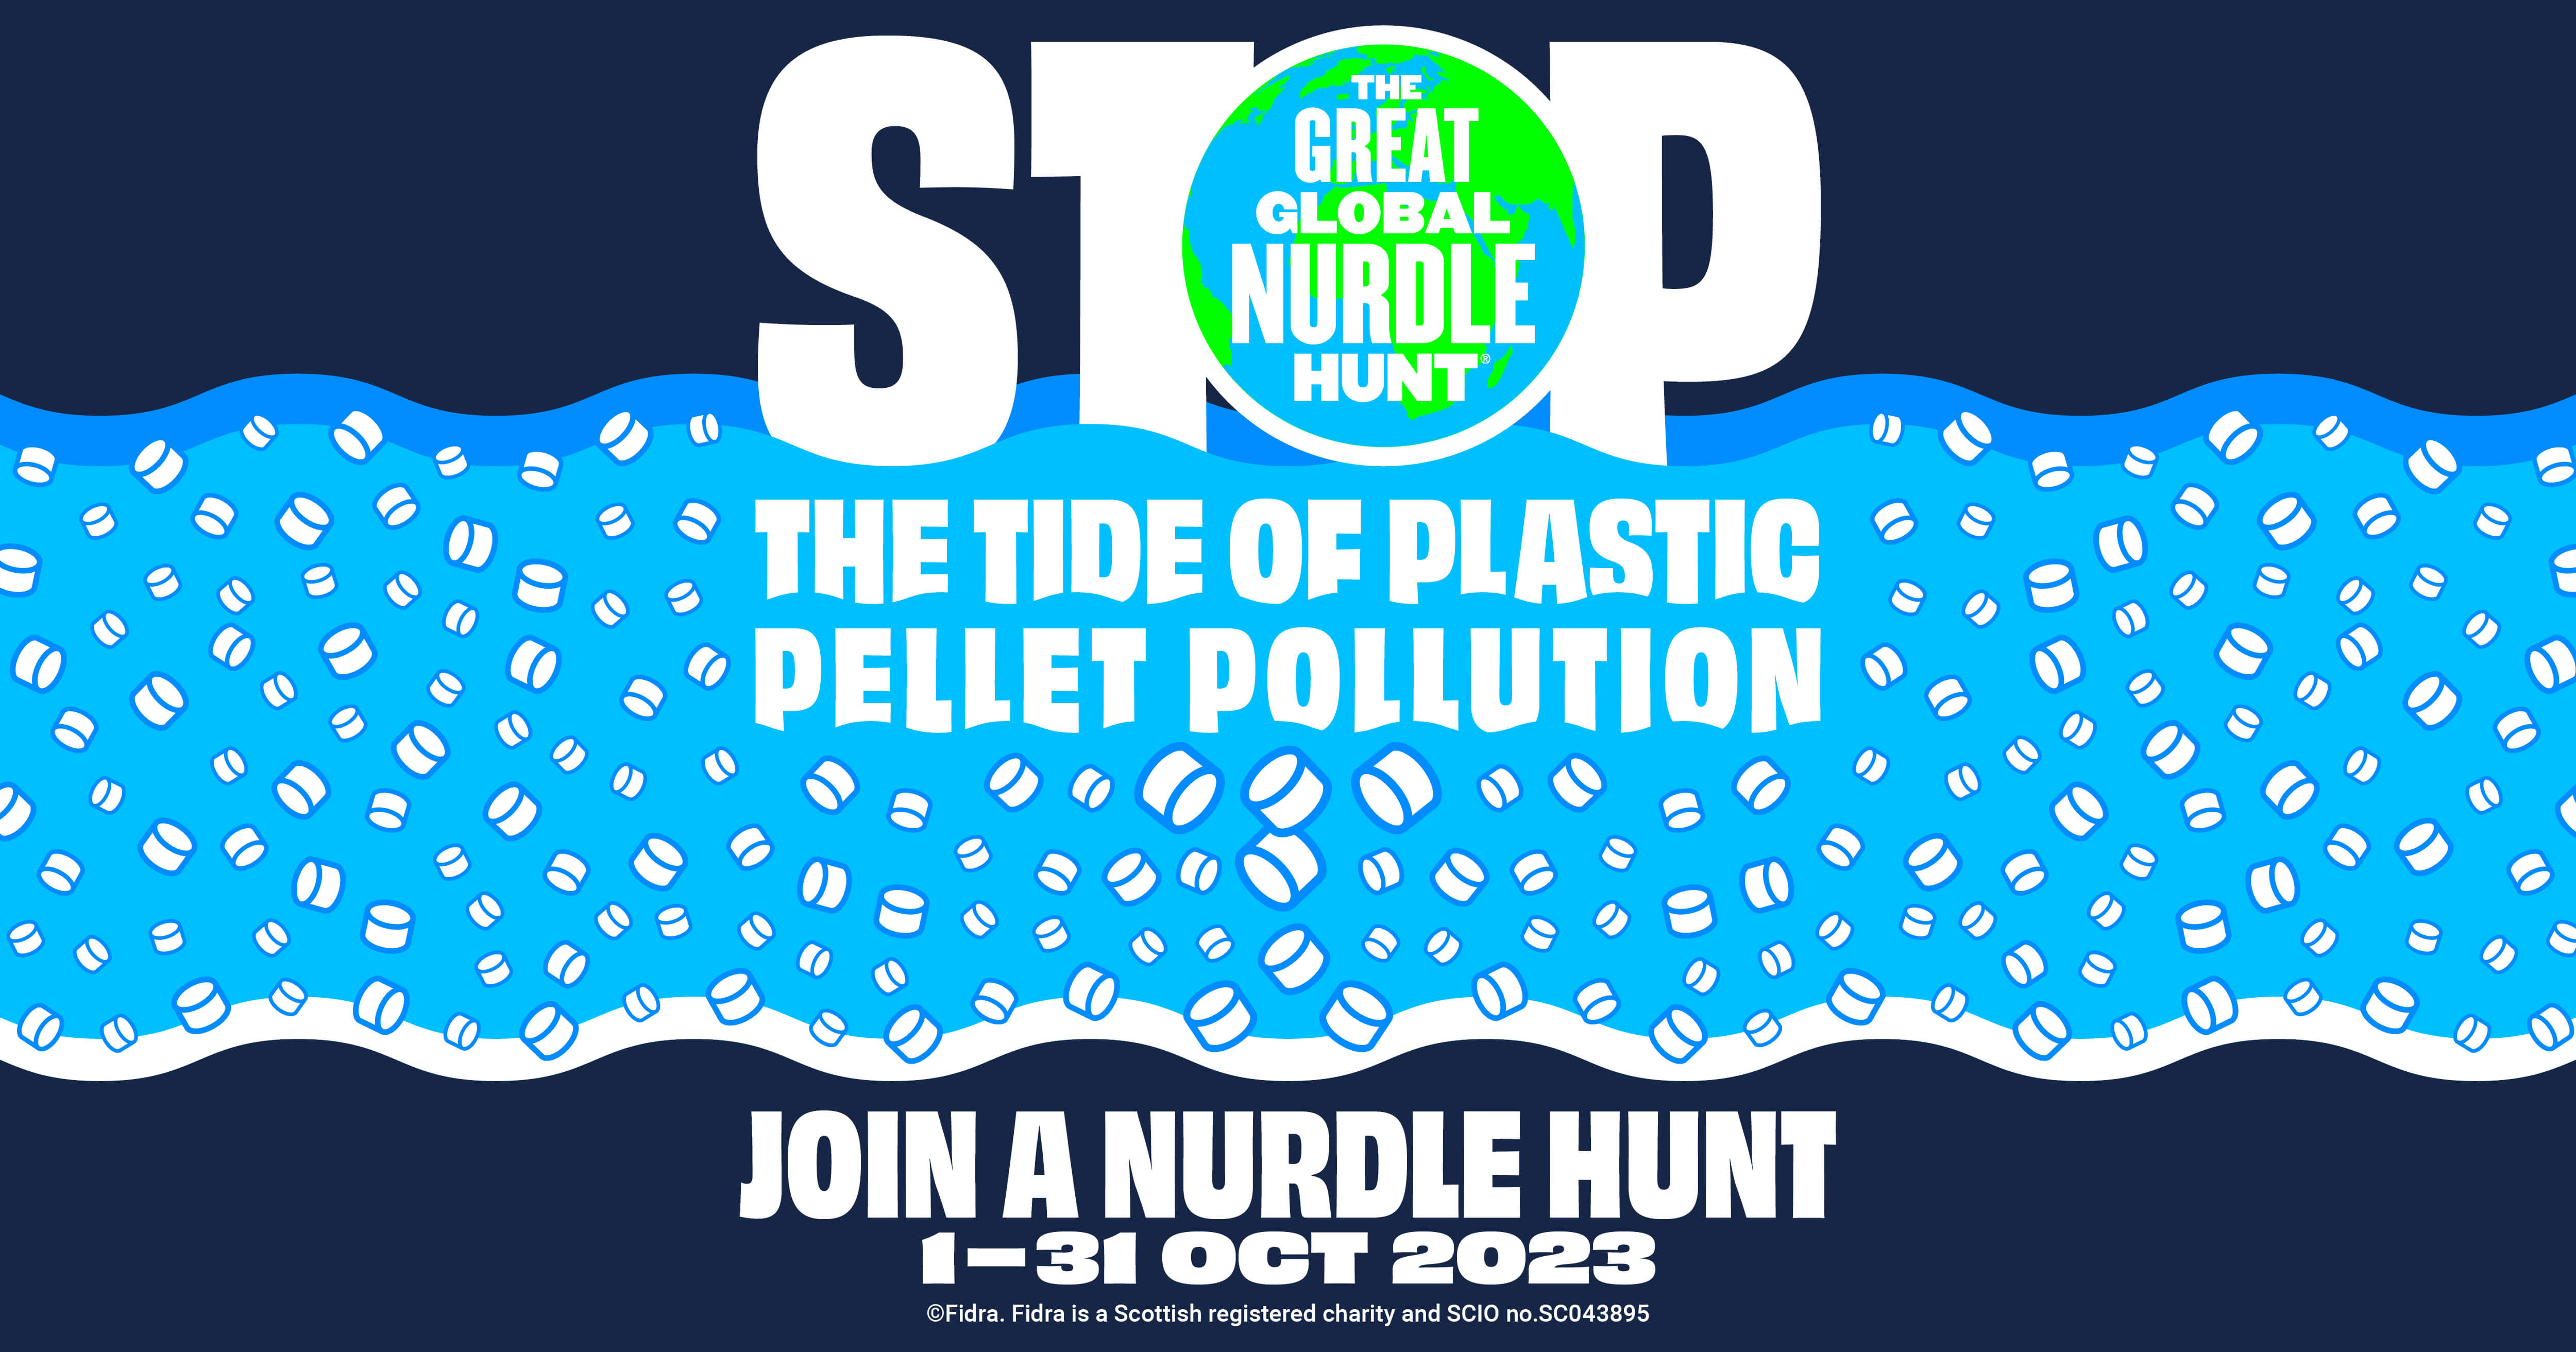 The Great Global Nurdle Hunt 1st-31st October